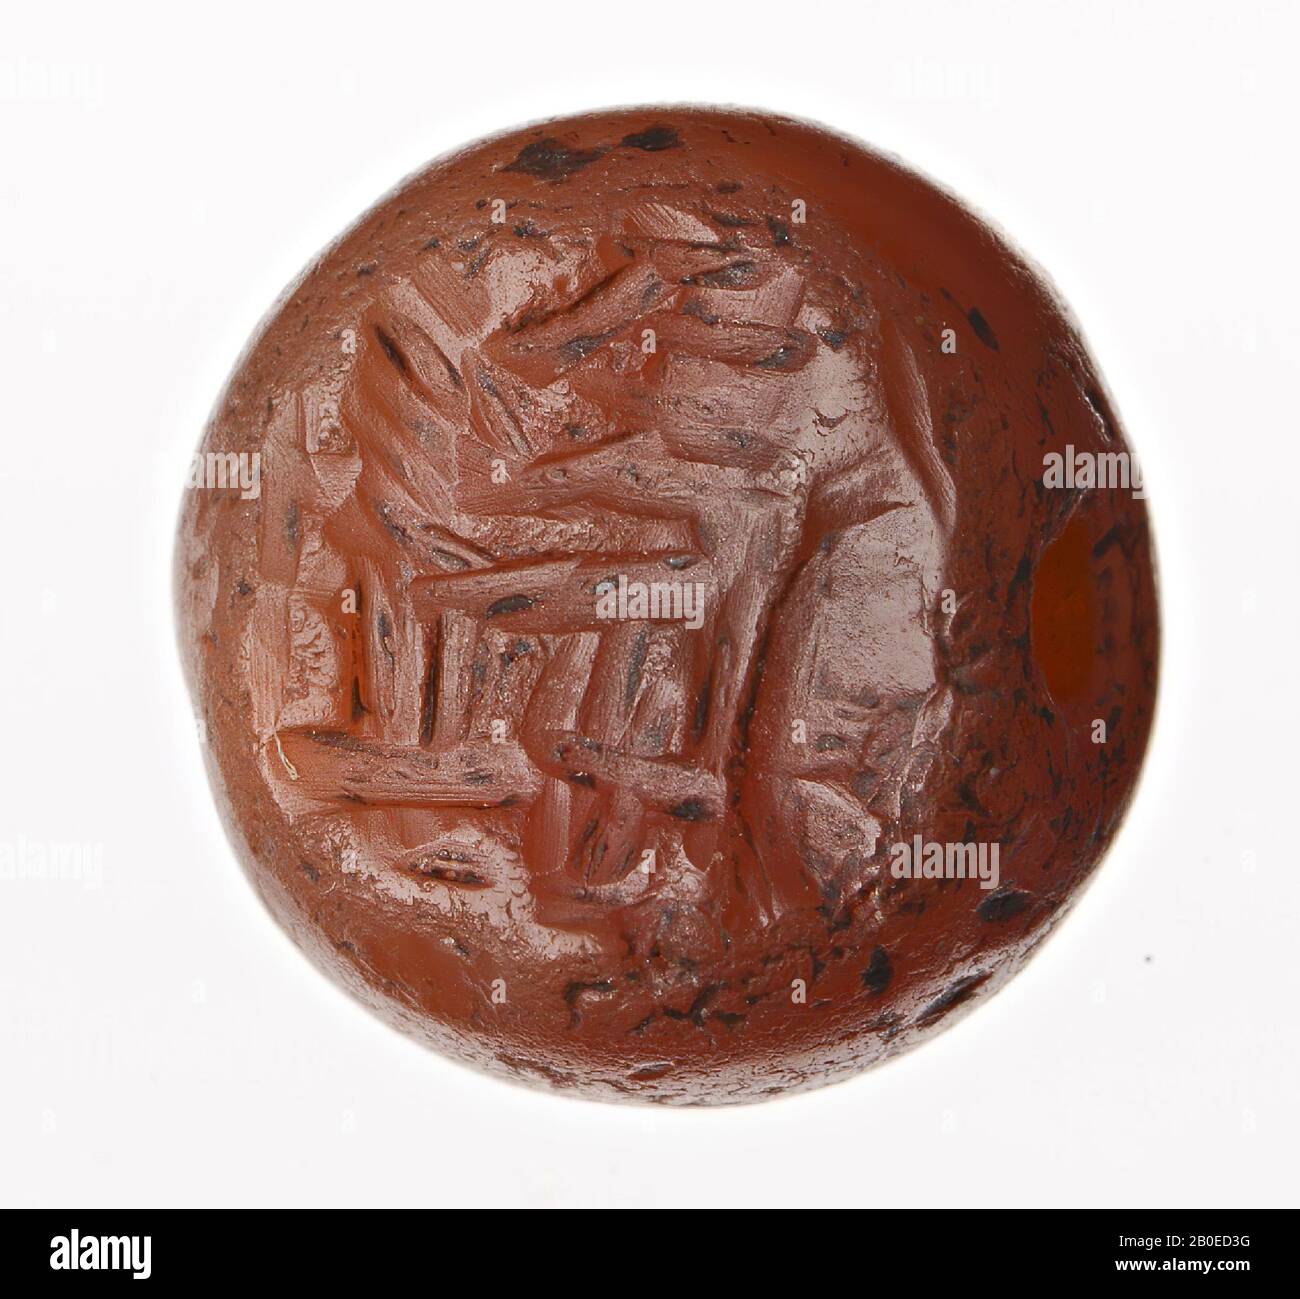 A dome-shaped stamp with an image of a standing priest (?) In front of a fire altar., Seal, stone, carnelian, H 0.9 cm, D1.2 cm, Iran Stock Photo